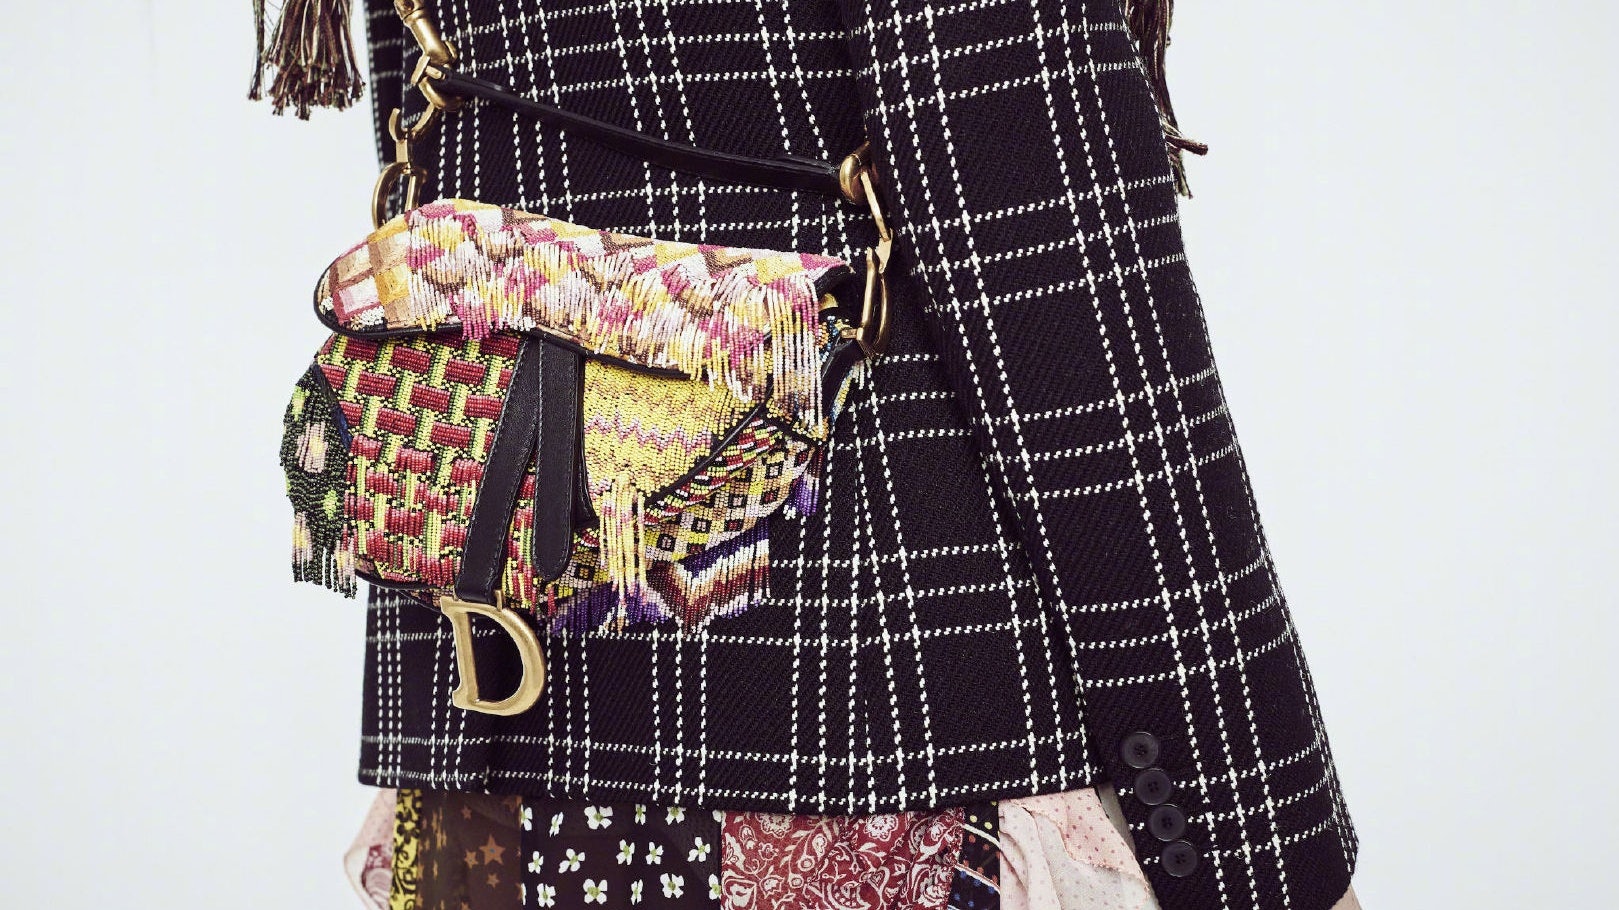 Chinese fashion consumer preferences have moved toward classic items that hold their value. Does that open the door for second-hand luxury in China? Photo: Courtesy of Dior